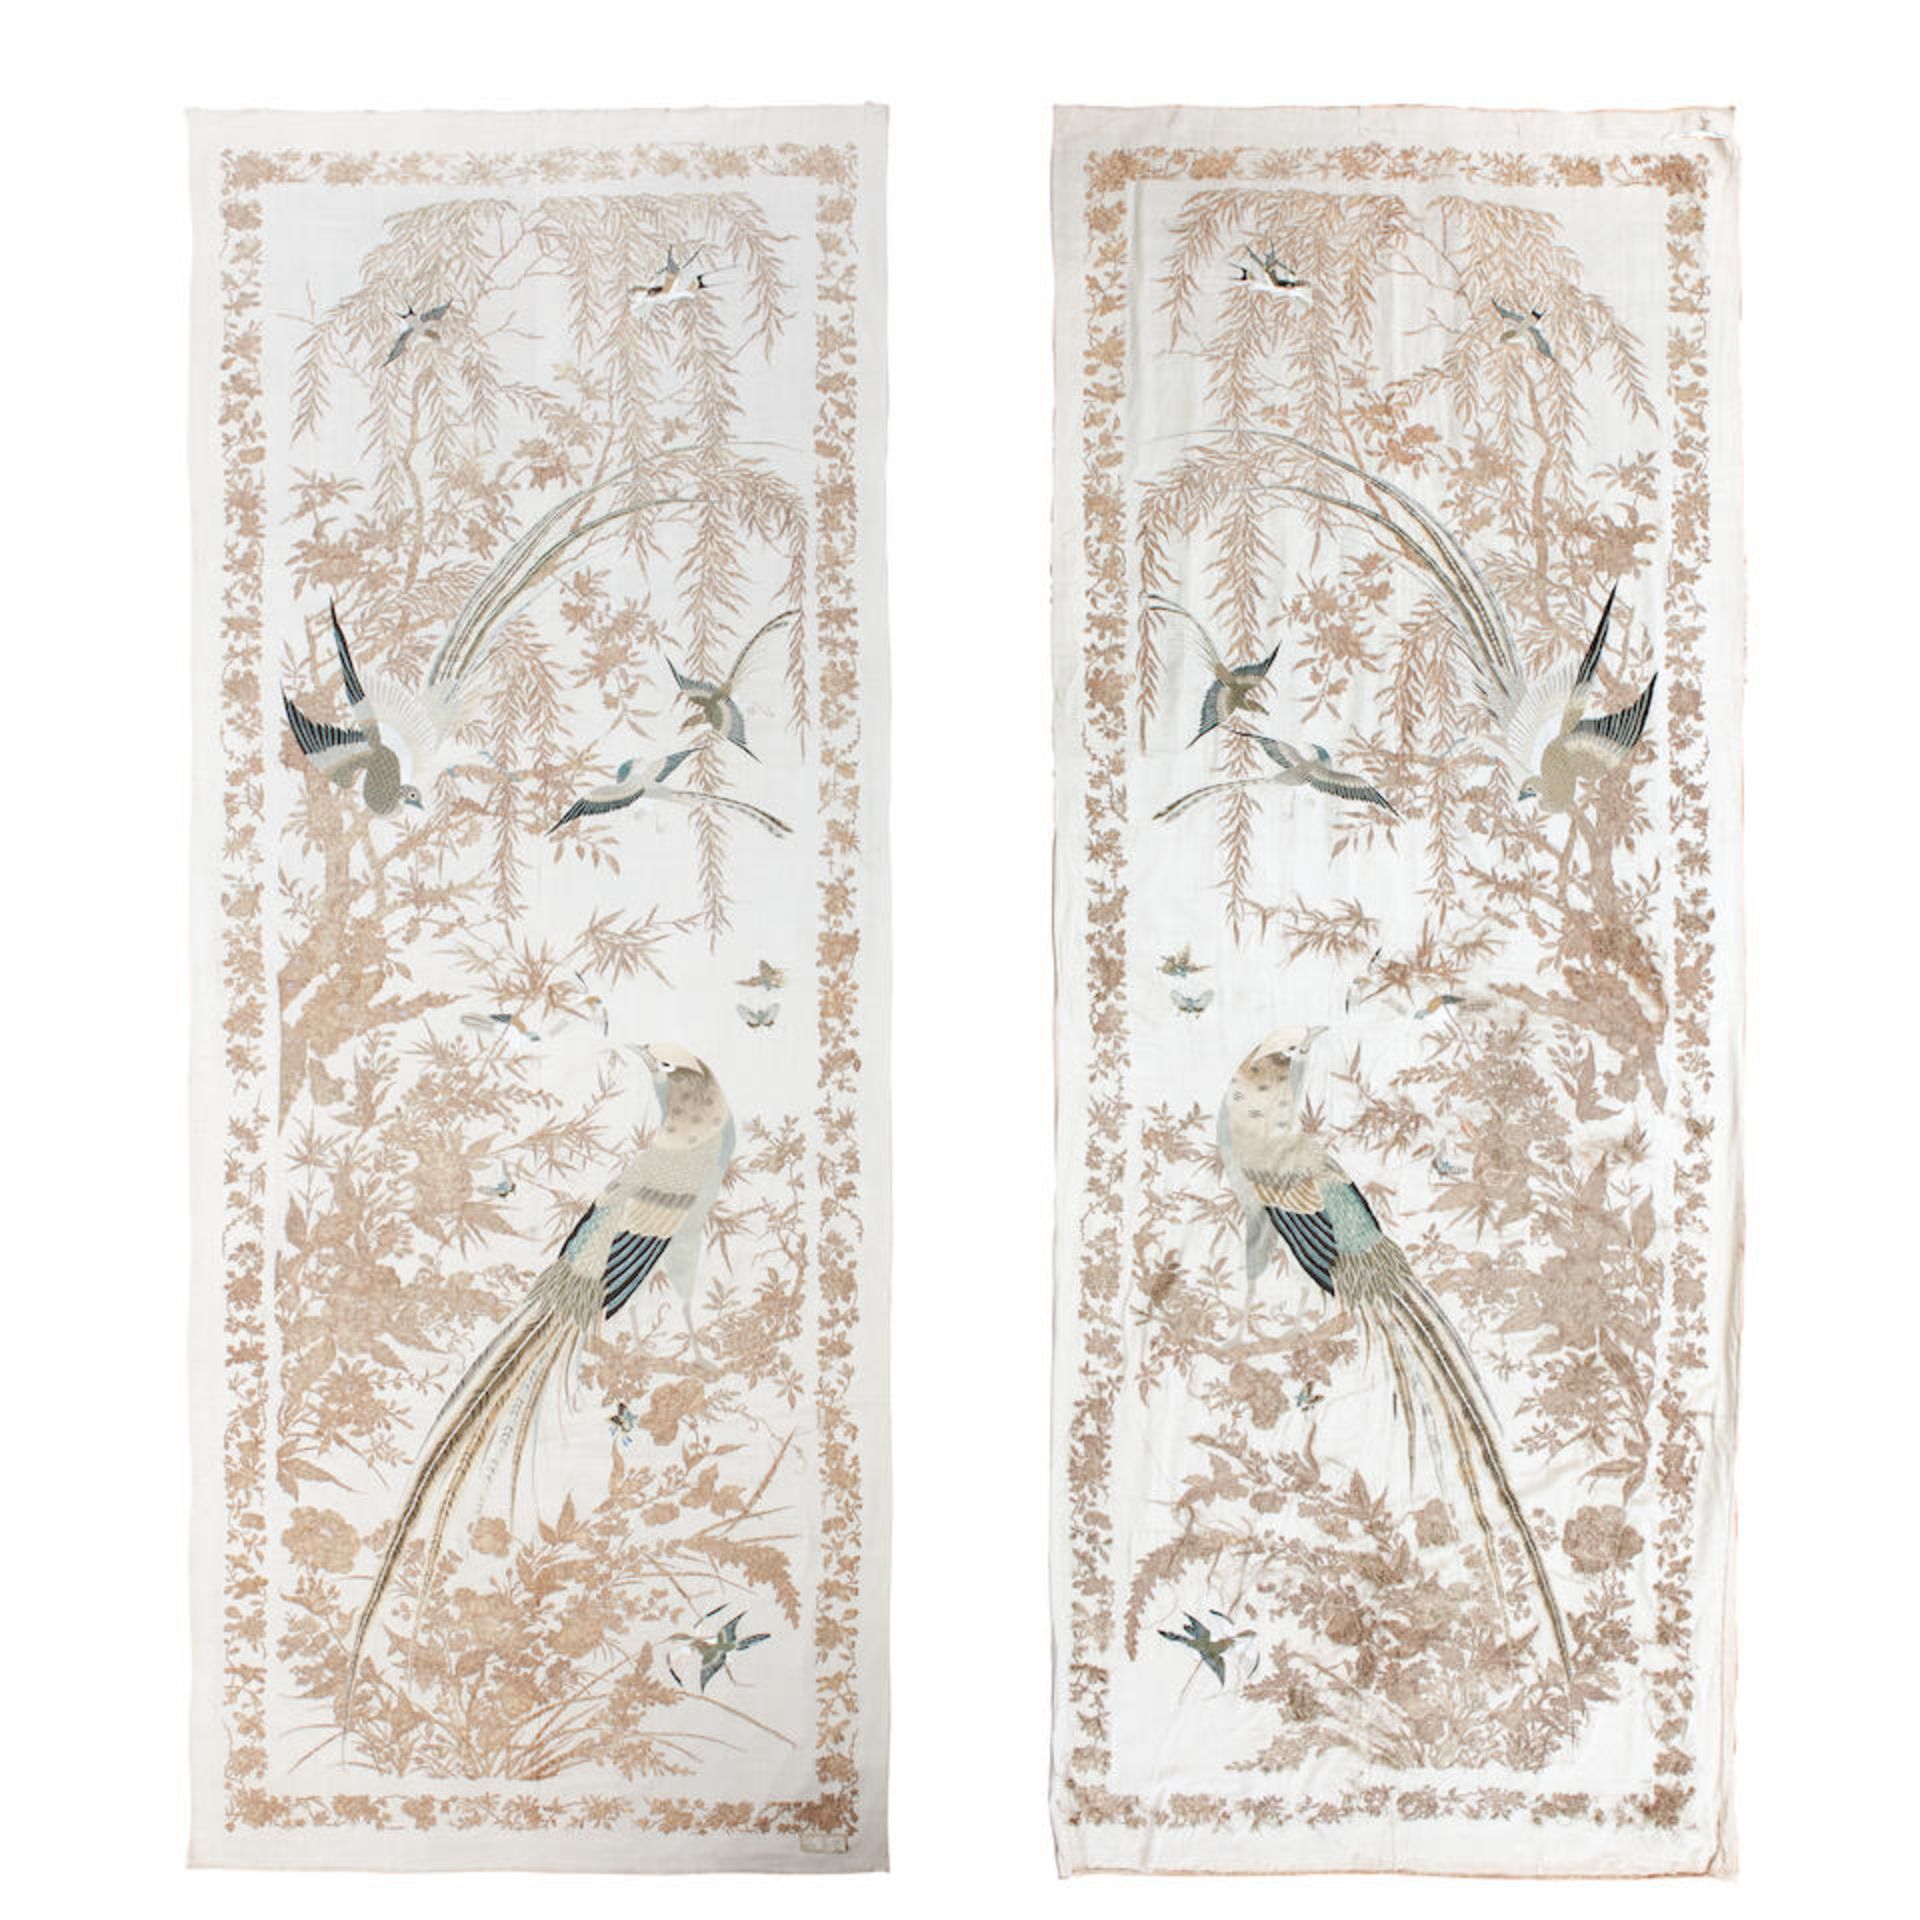 A pair of early 20th century silk Chinese embroidered wall hangings Signed Bao sheng chang' &#2...